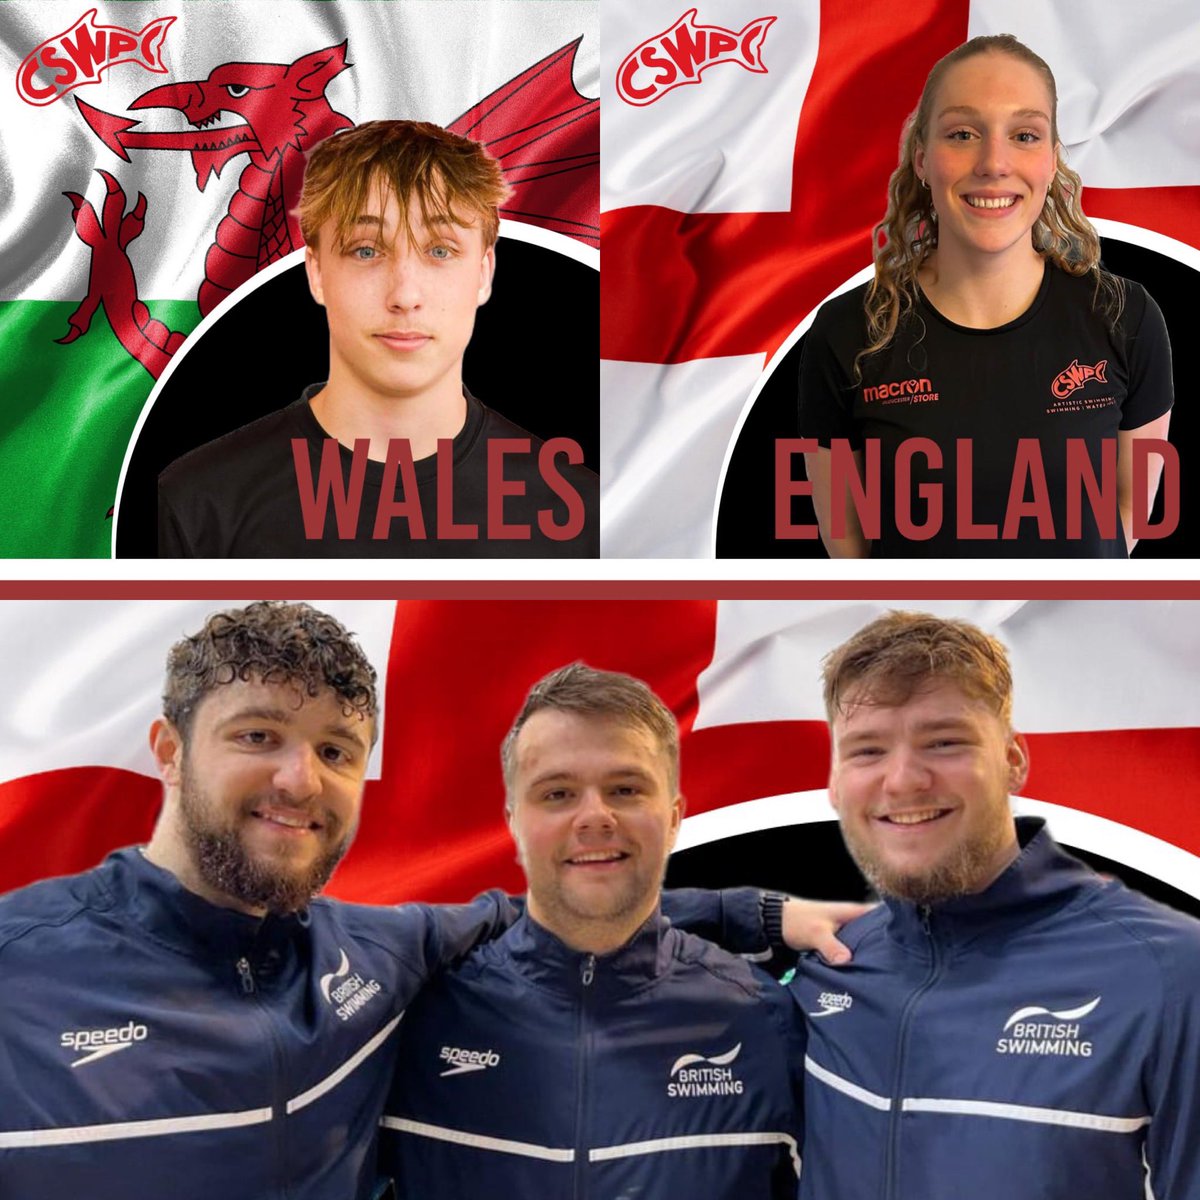 Good luck to all the Cheltenham athletes heading to Dublin this weekend to take part in the Home Nations Water Polo Tournament! England Men Rudi Polster, Tom Hunt and George Davis 🏴󠁧󠁢󠁥󠁮󠁧󠁿 England Amelie Perkins 🏴󠁧󠁢󠁥󠁮󠁧󠁿 Wales Toby Chilcott 🏴󠁧󠁢󠁷󠁬󠁳󠁿 #waterpolo